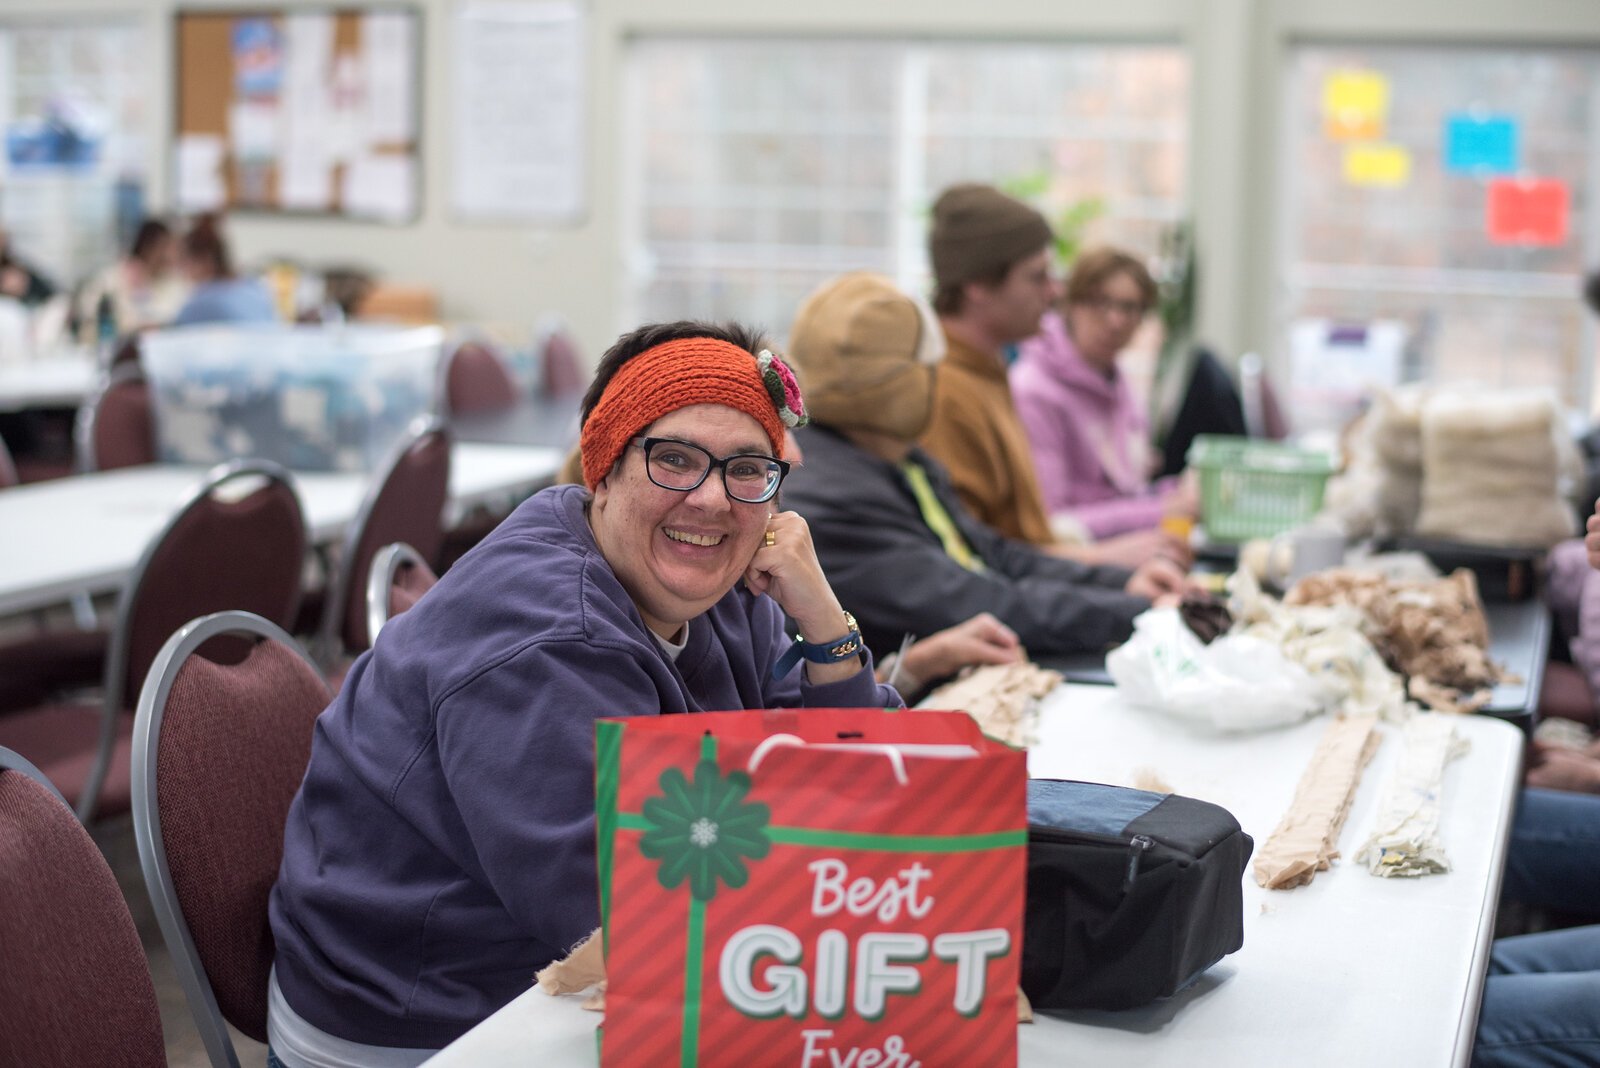 Teams of residents, participants, and volunteers skirt and wash the wool and alpaca fiber, operate the looms and carding machines and make wool dryer balls, cat toys, banners, potholders, wool scarves, bags, and other products.